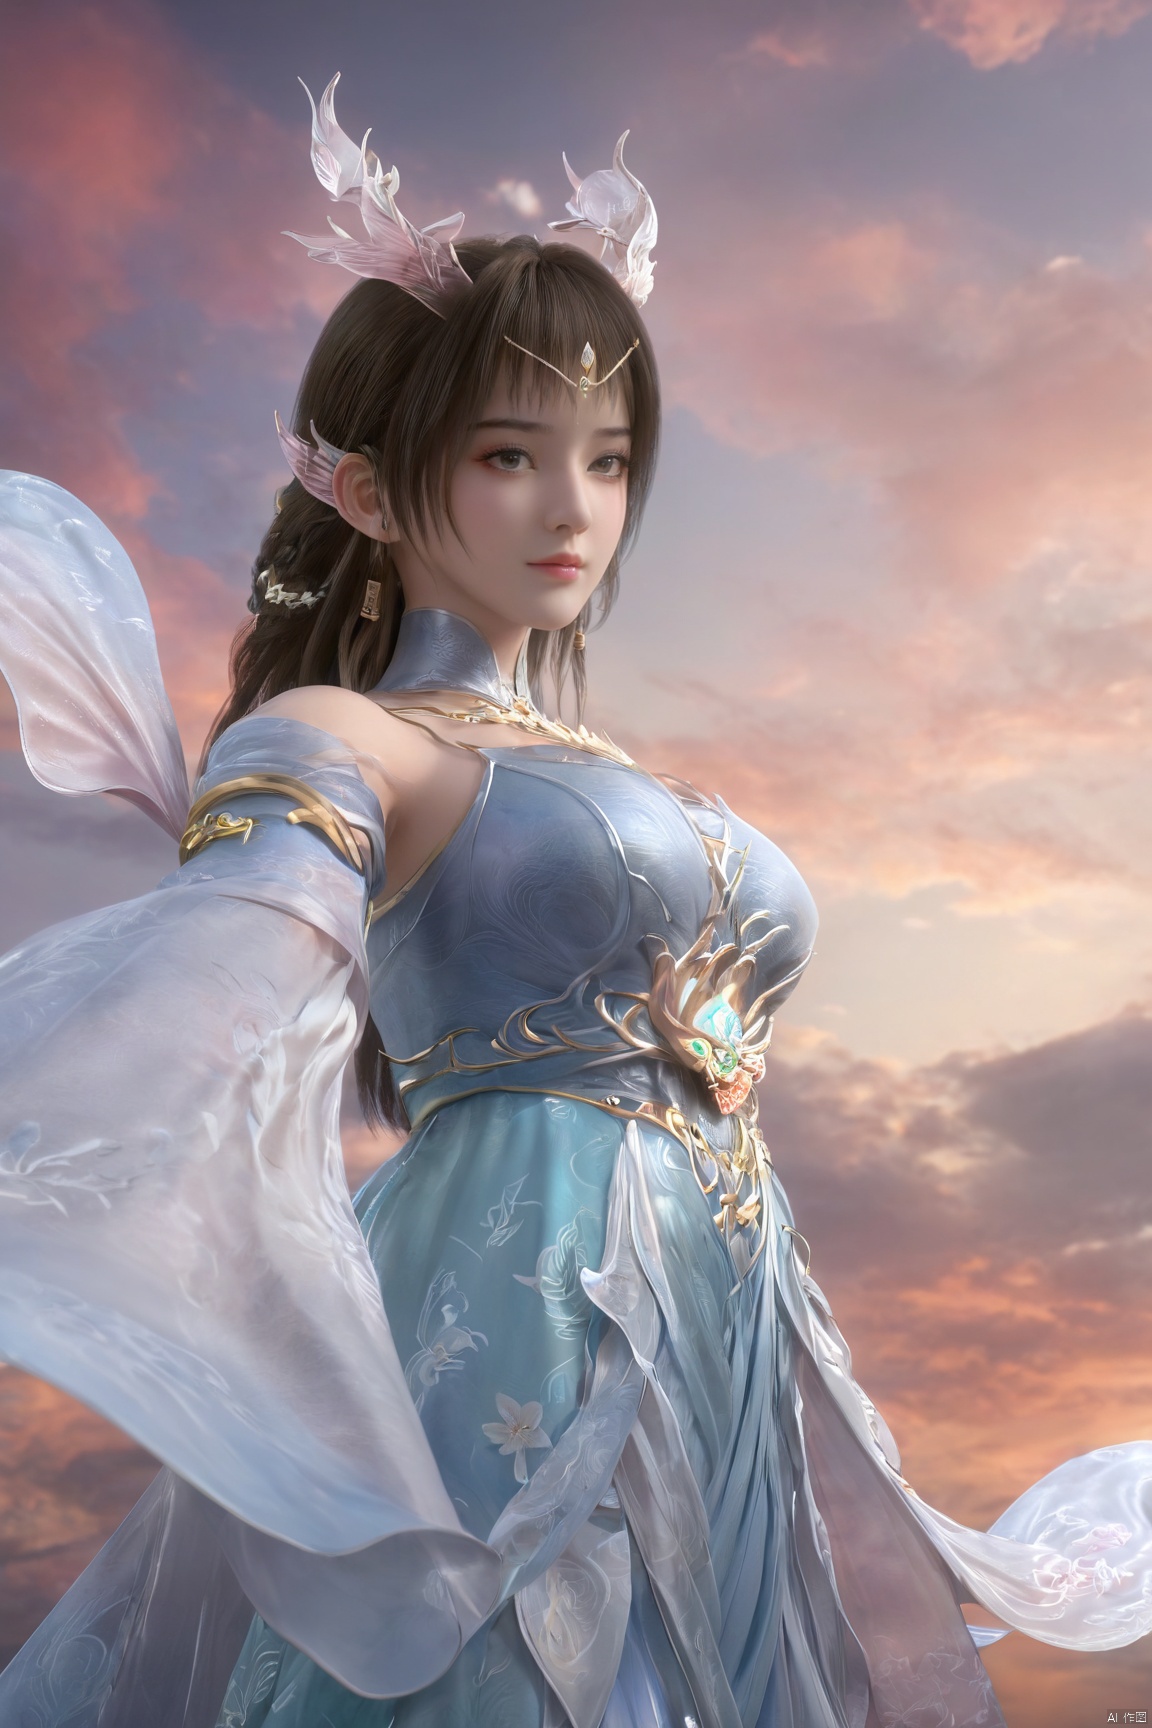 masterpiece,best quality,official art,extremely detailed CG unity 8k wallpaper,1girl, upper body,chinese clothes, above clouds, asteroid, spacecraft,Xyunluo,(big_breasts:1.59),(Hydrangea,X-Hydrangea),Xlimuwan, Water_butterfly,Xcheongsam, desert_sky,girl,depth of field, 1 girl,Xtianqiong,Xbaihehuai, X-Hydrangea, song_hanfu,hanfu, traditional chinese ink painting